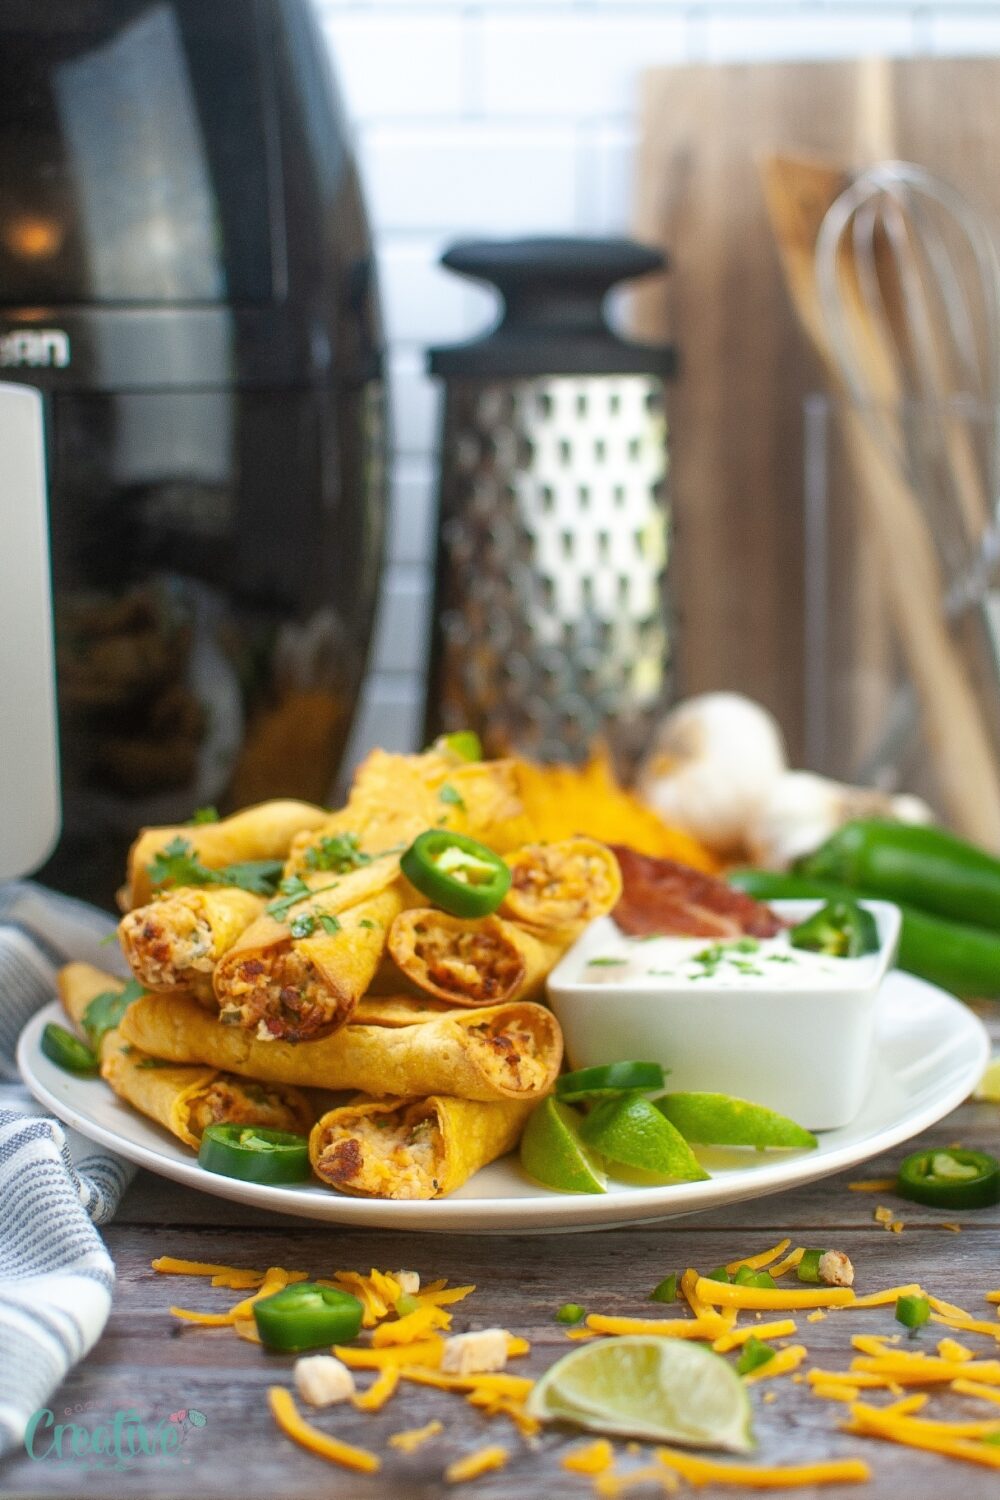 Spicy air fryer taquitos: A spicy treat blending creamy cheese and tangy jalapenos.